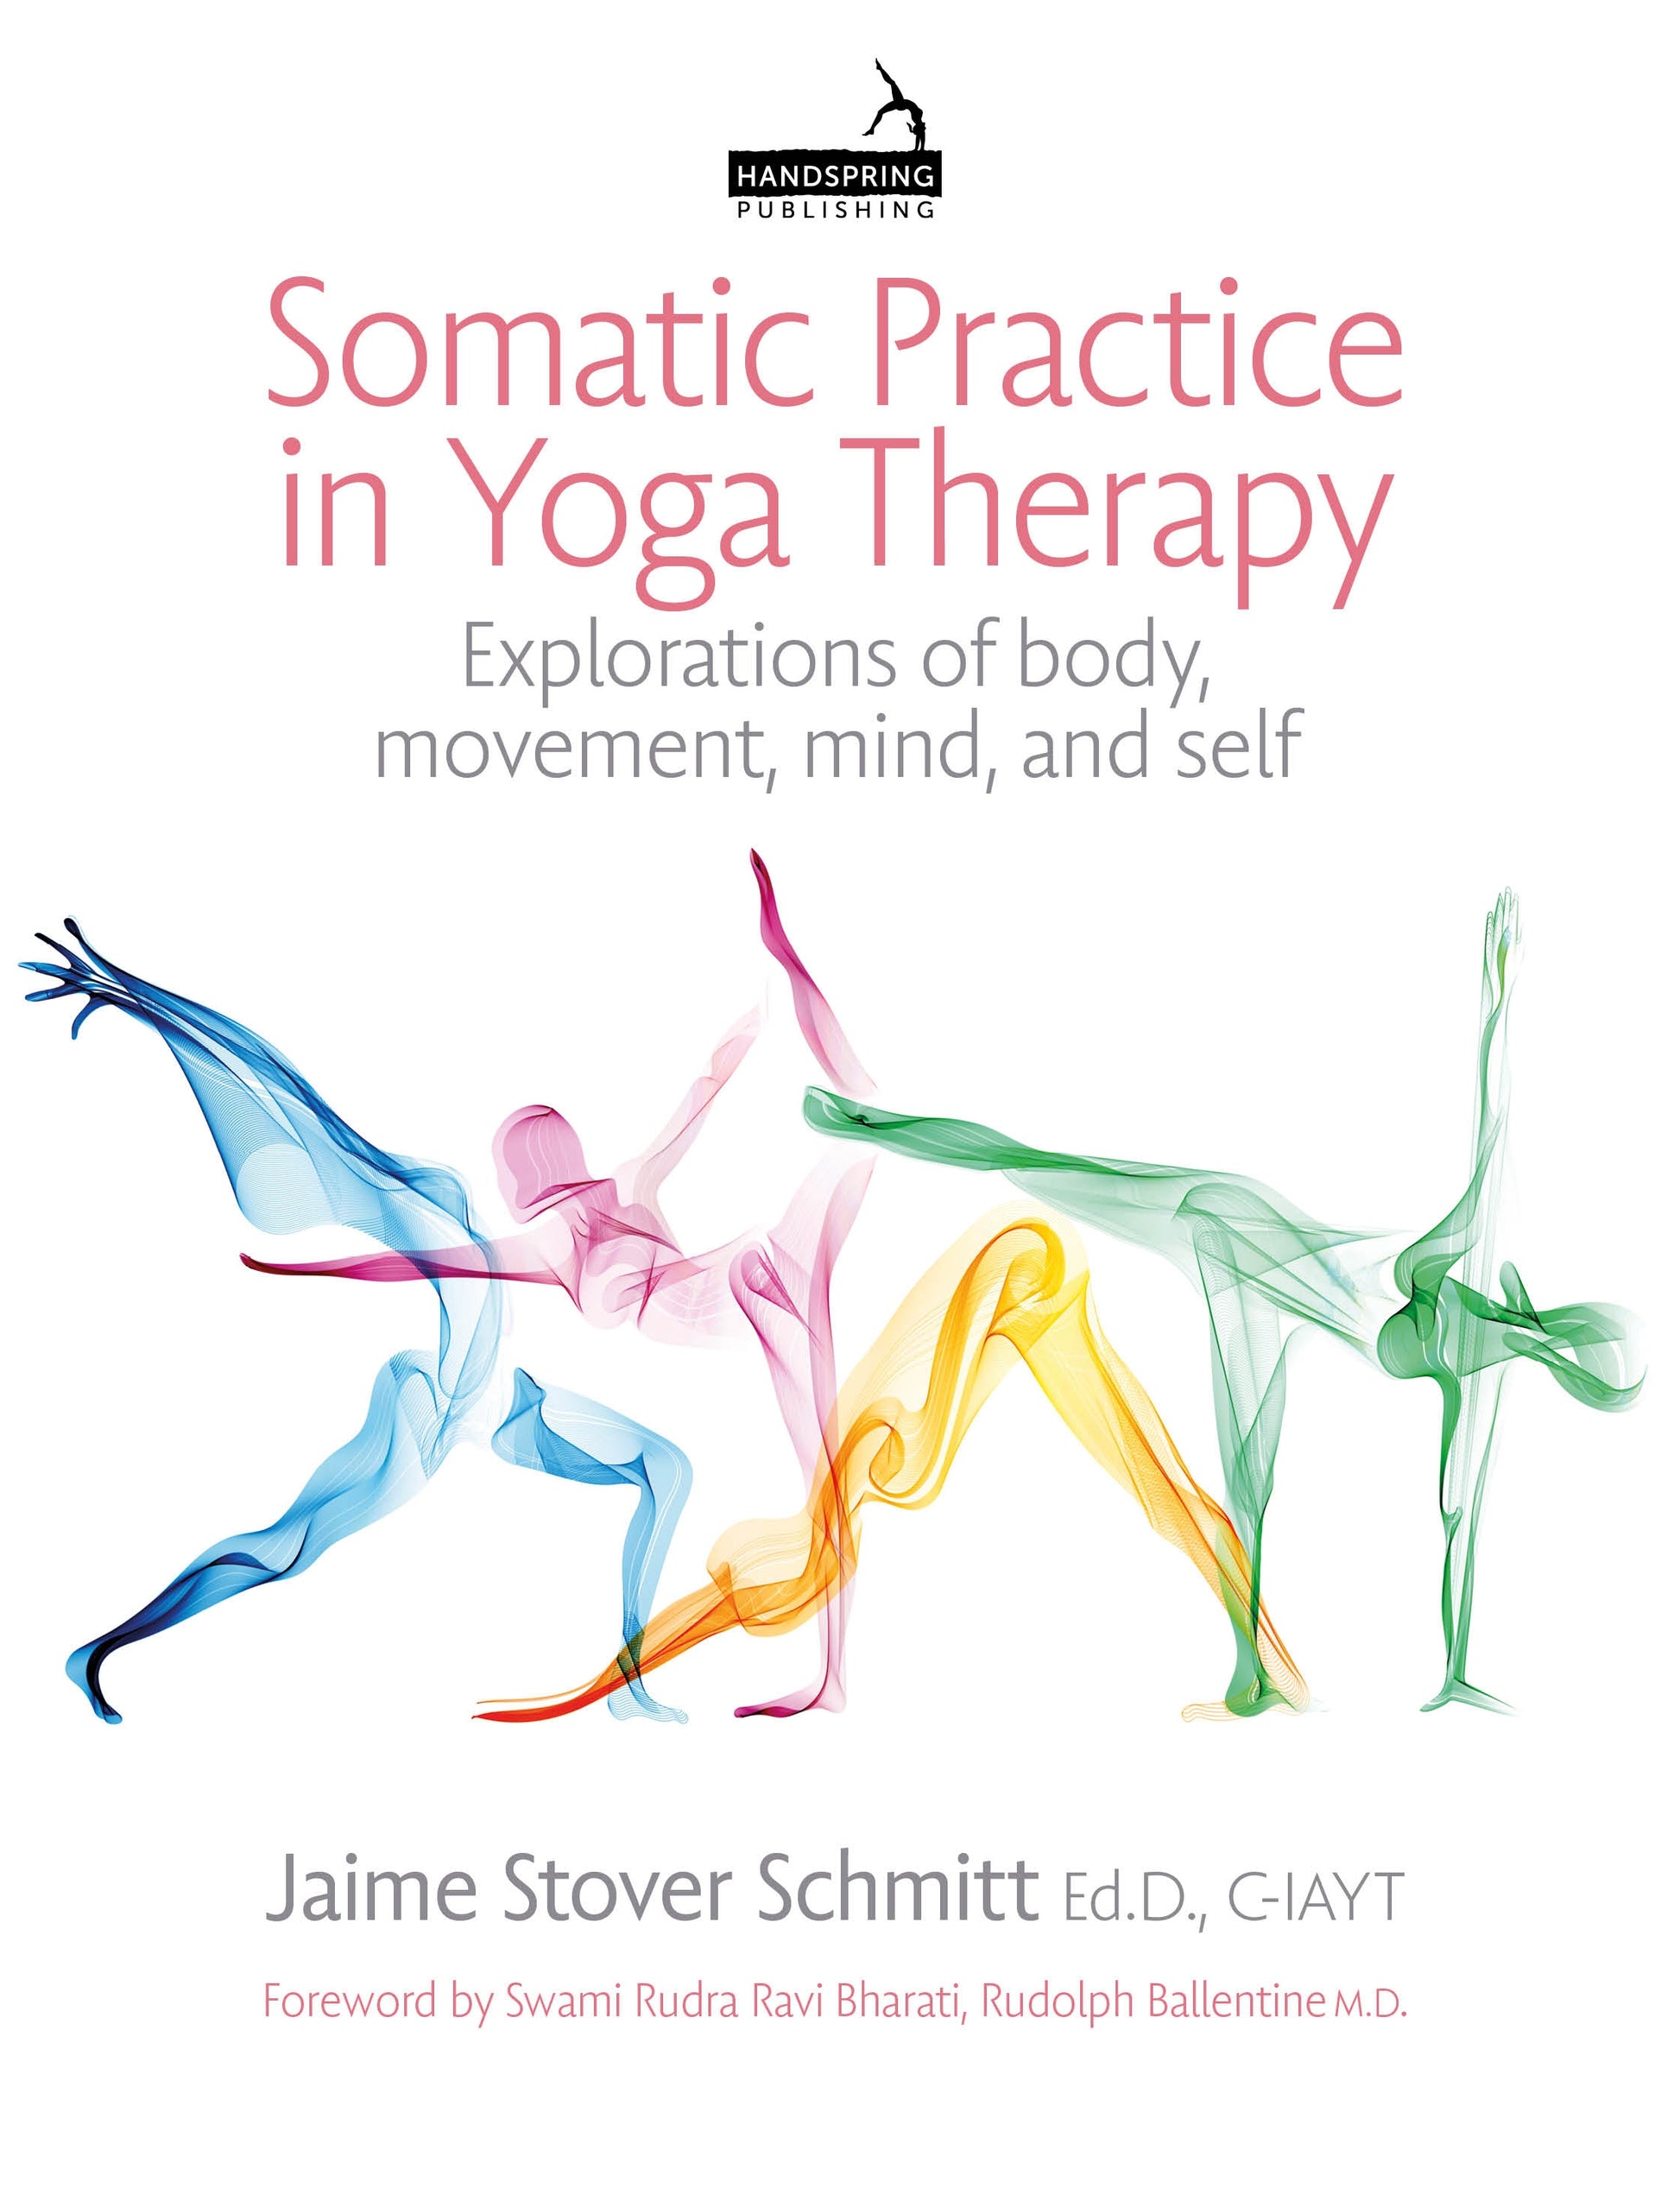 Somatic Practice in Yoga Therapy by Jaime Stover Schmitt